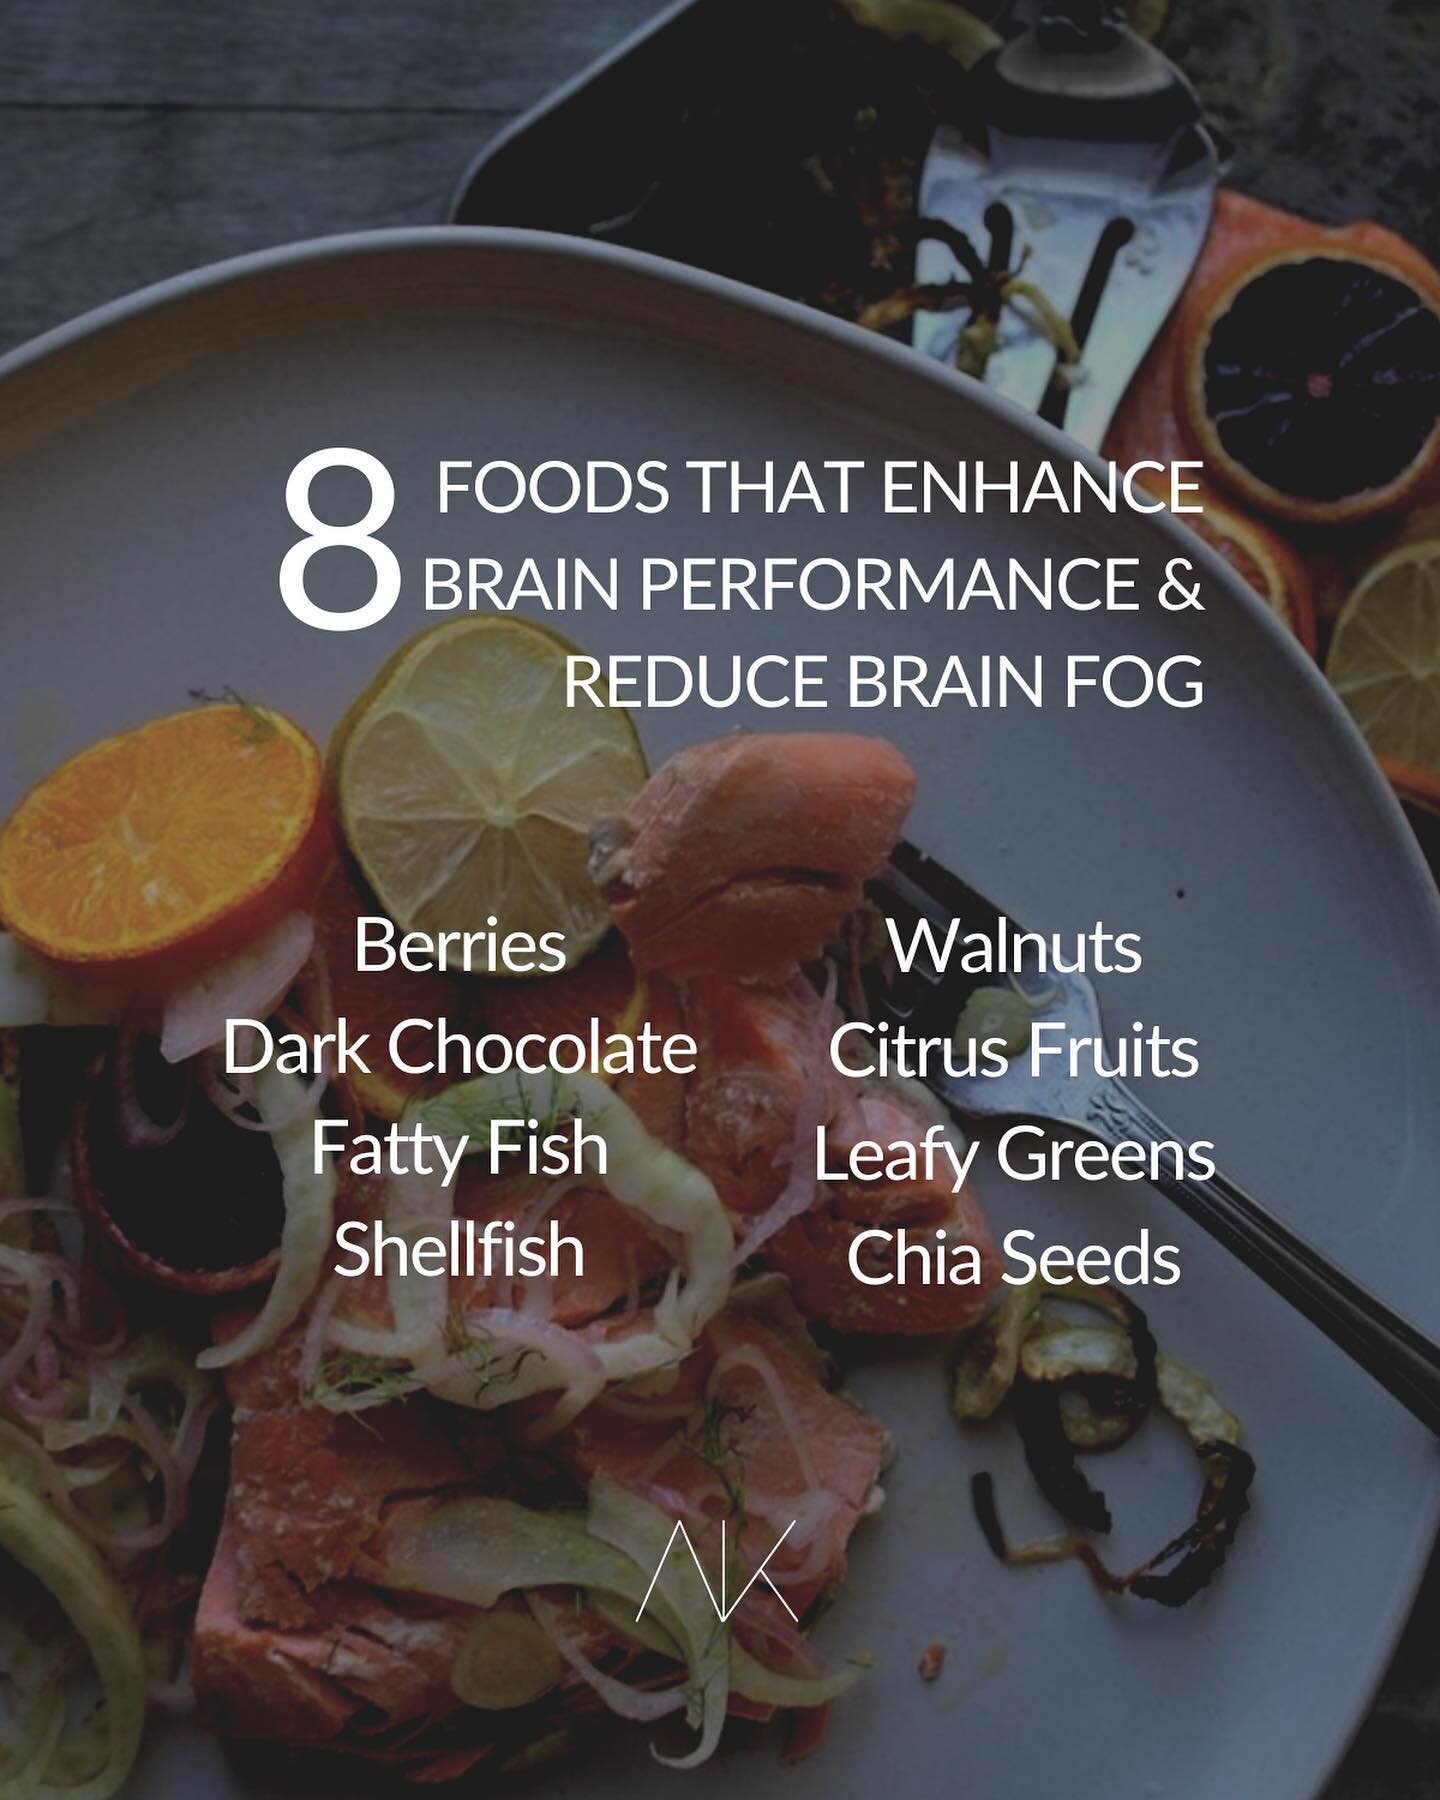 If you&rsquo;re finding yourself feeling mentally foggy and unable to concentrate, you could be suffering from brain fog. You may also feel sluggish and more exhausted. 

Luckily, one of the first things we can do for ourselves is reduce these sympto